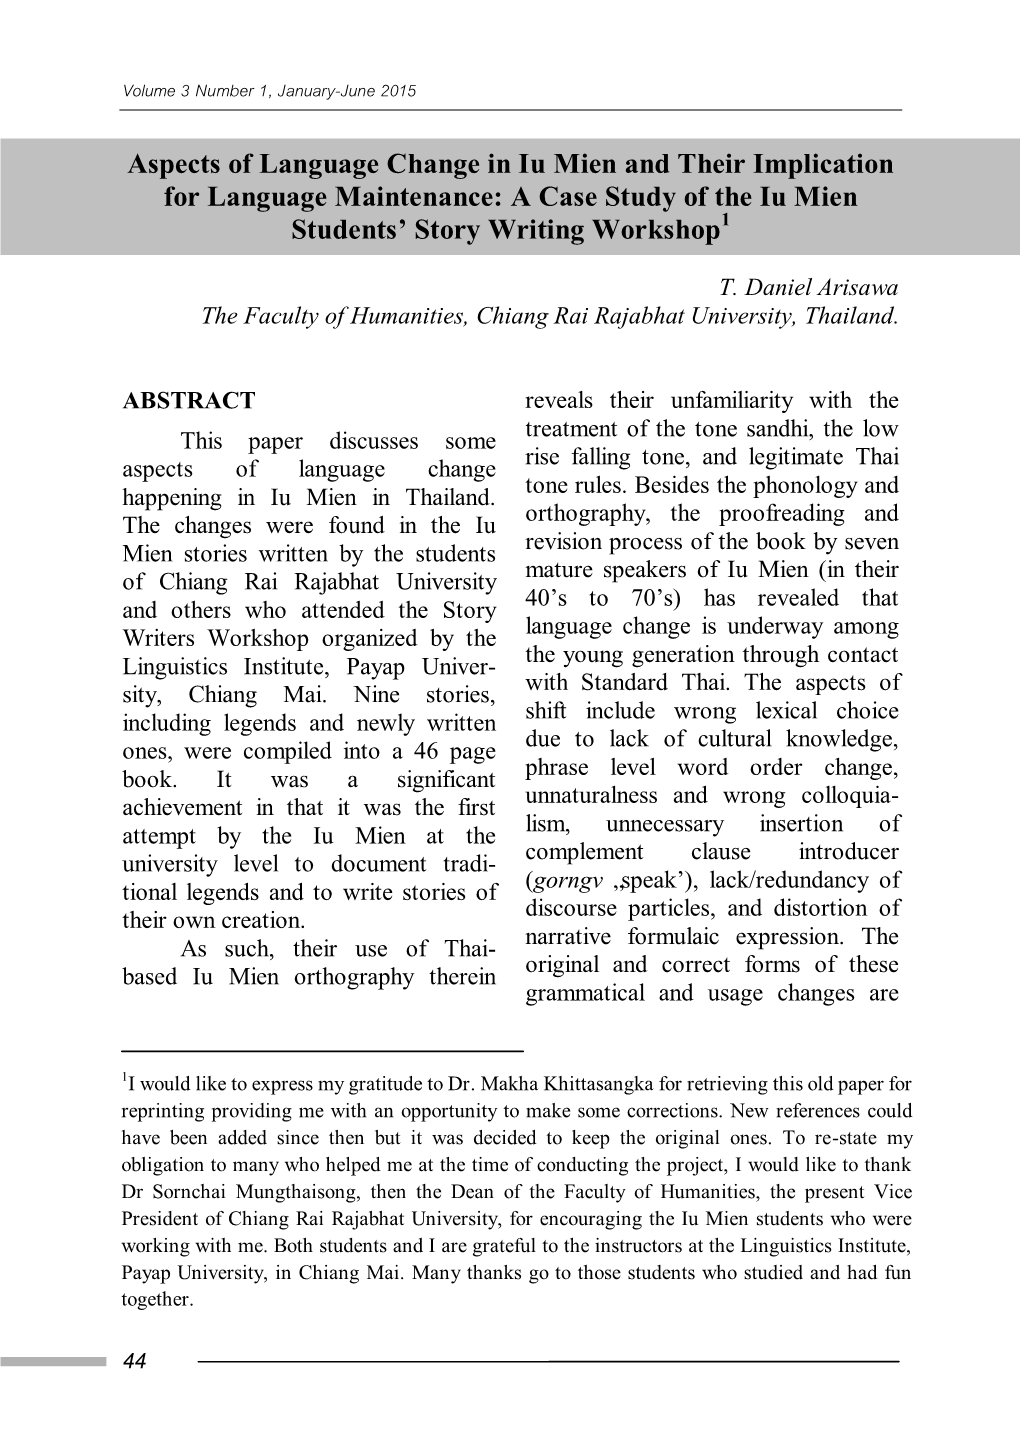 Aspects of Language Change in Iu Mien and Their Implication for Language Maintenance: a Case Study of the Iu Mien Students’ Story Writing Workshop1